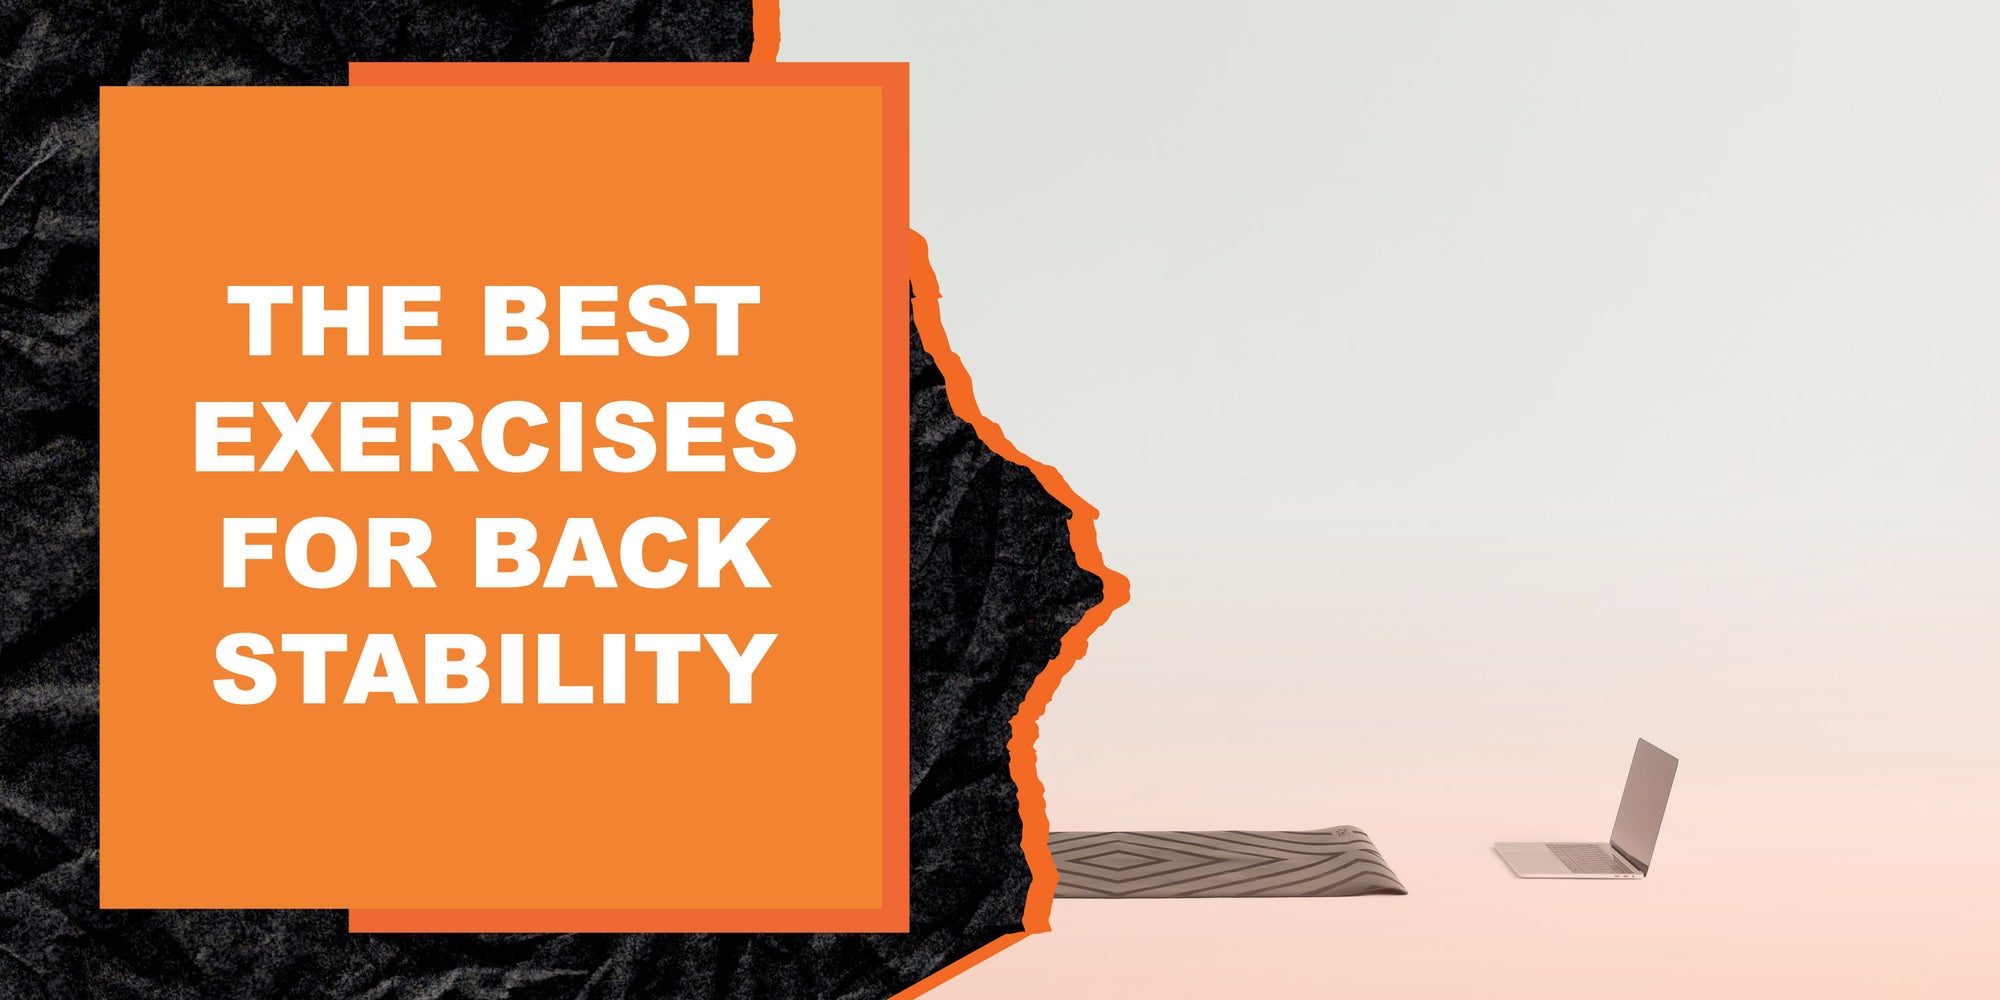 The Best Exercises for Back Stability